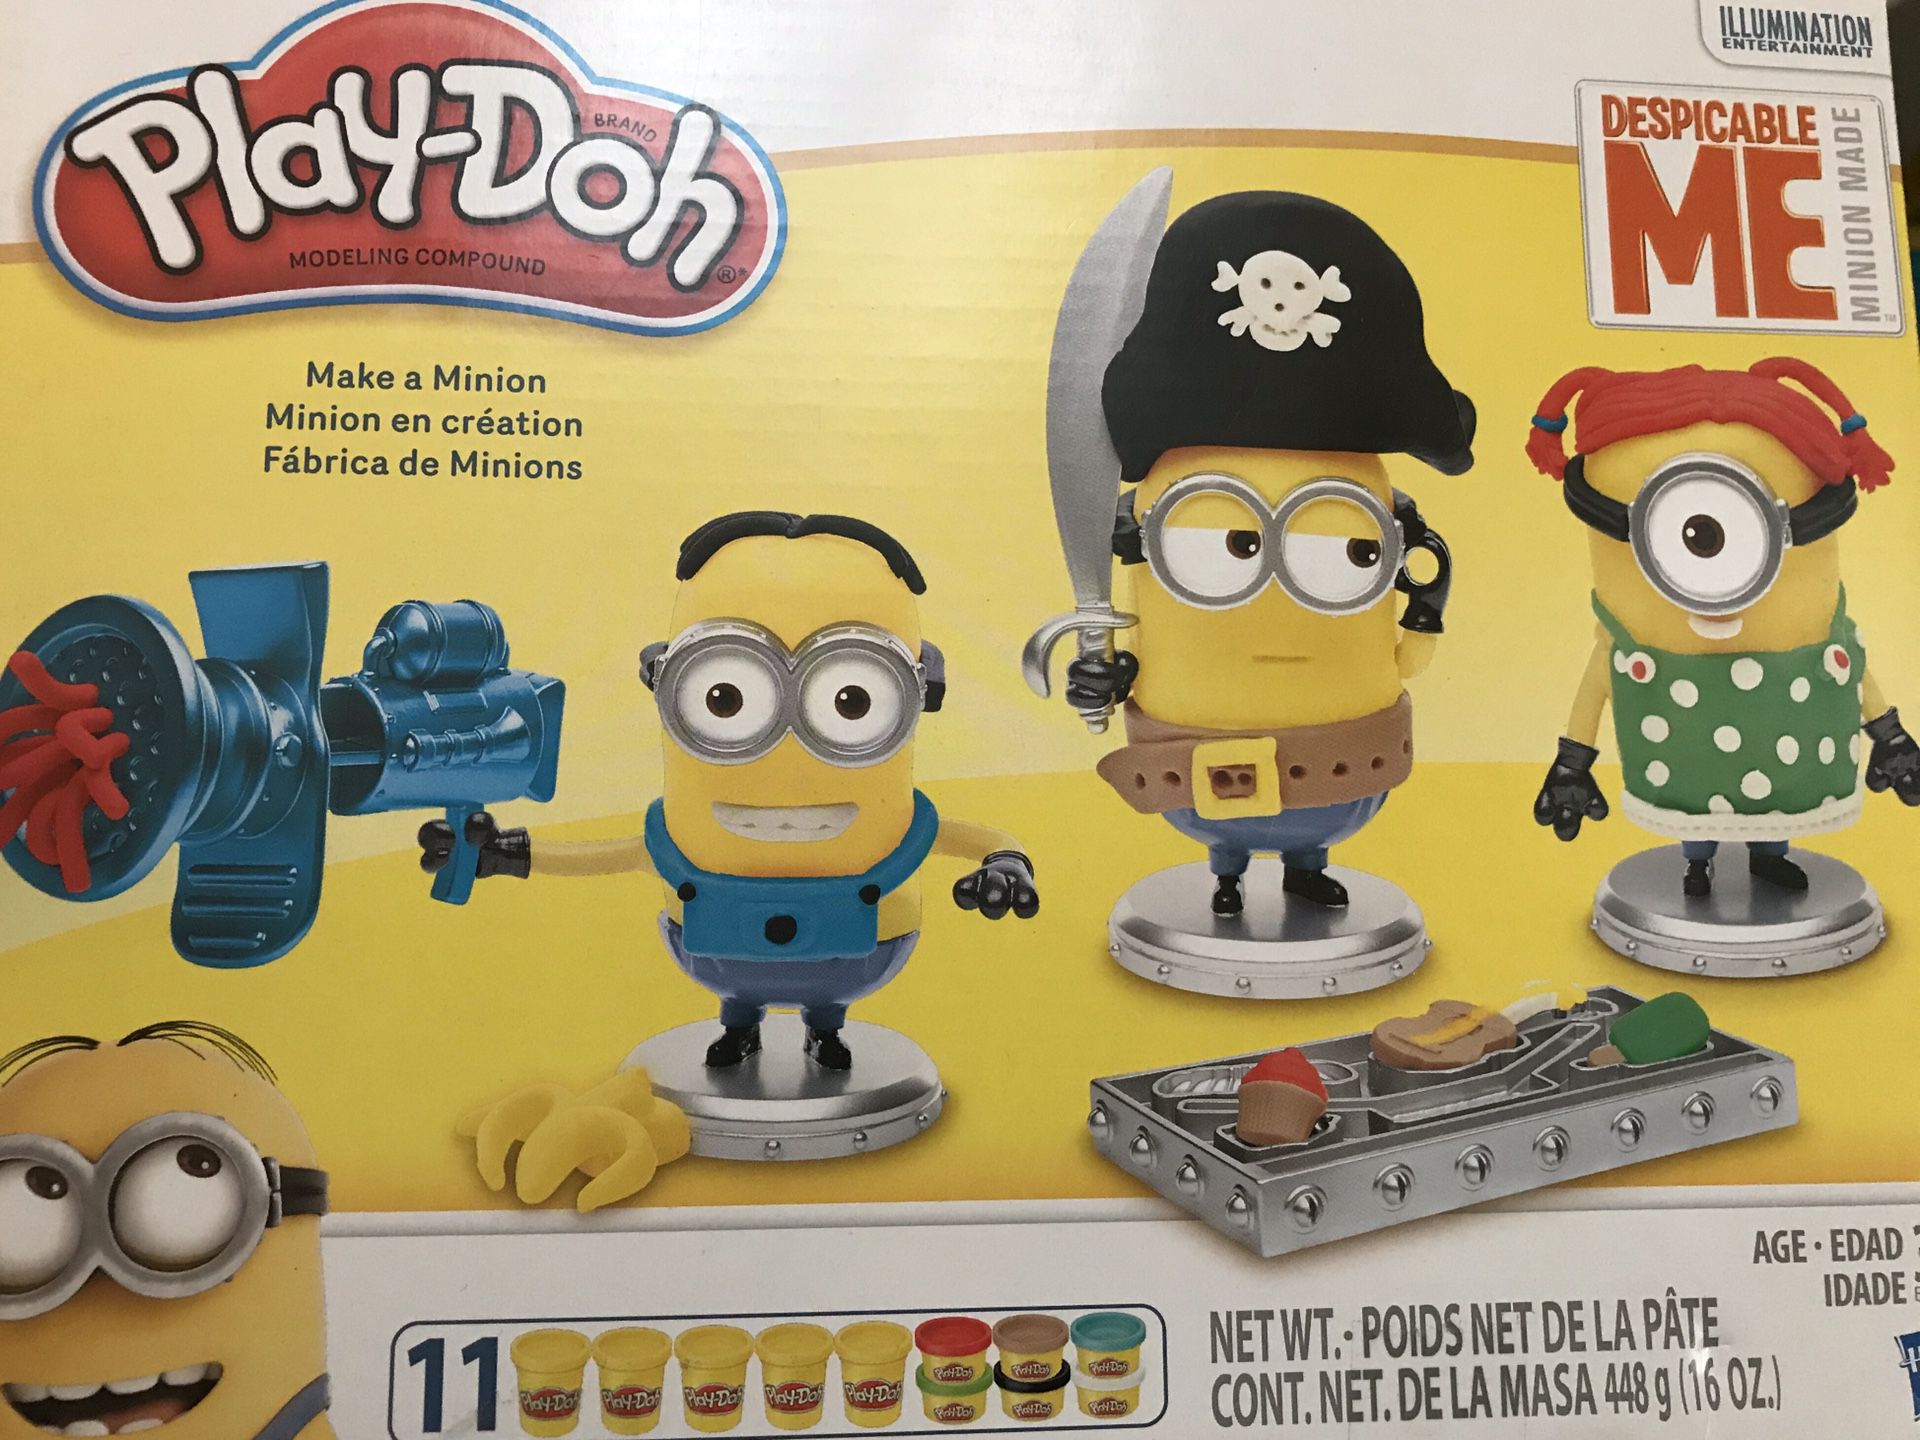 New Play-Doh Despicable Me Minions